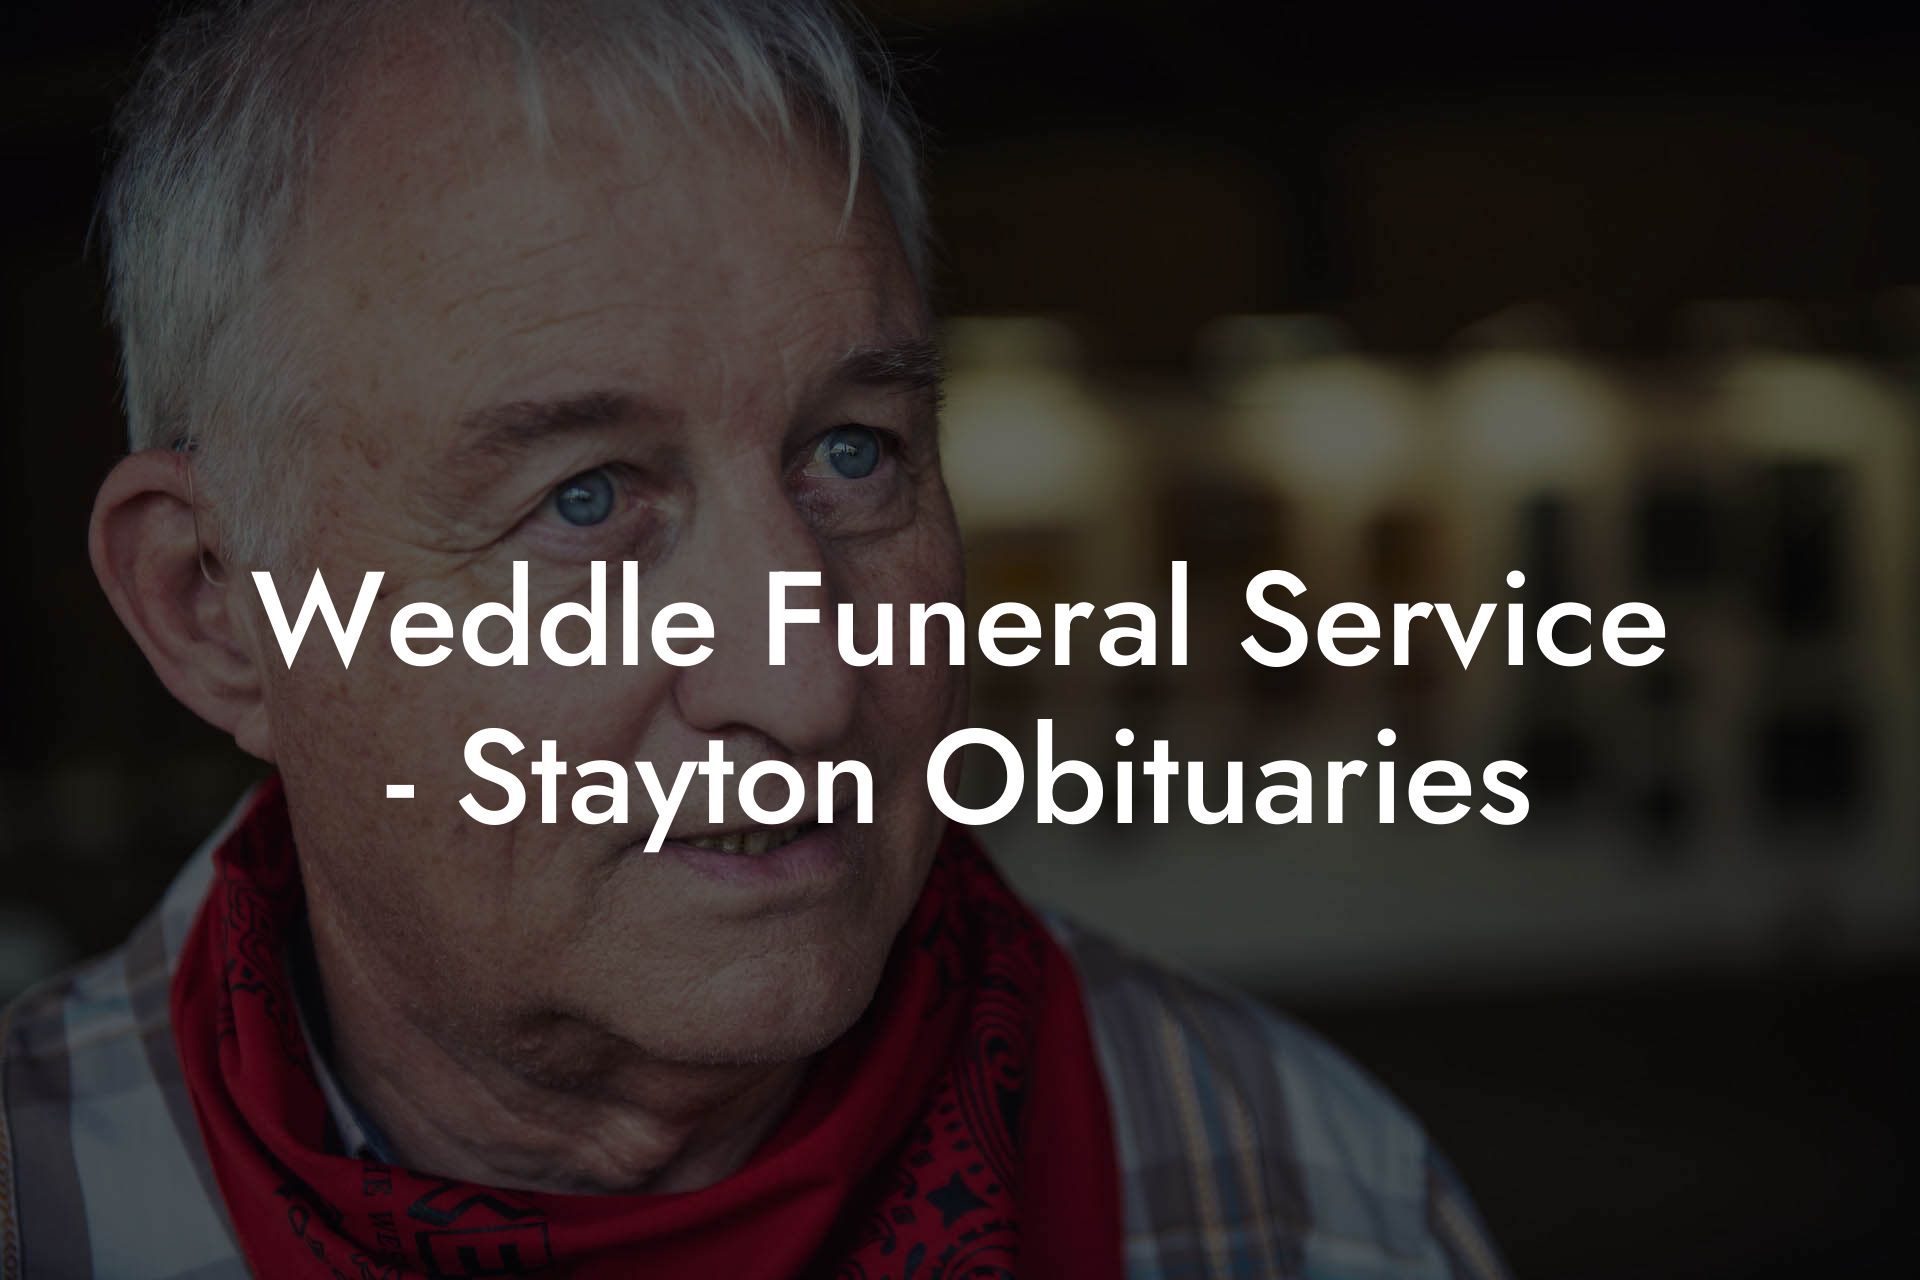 Weddle Funeral Service - Stayton Obituaries